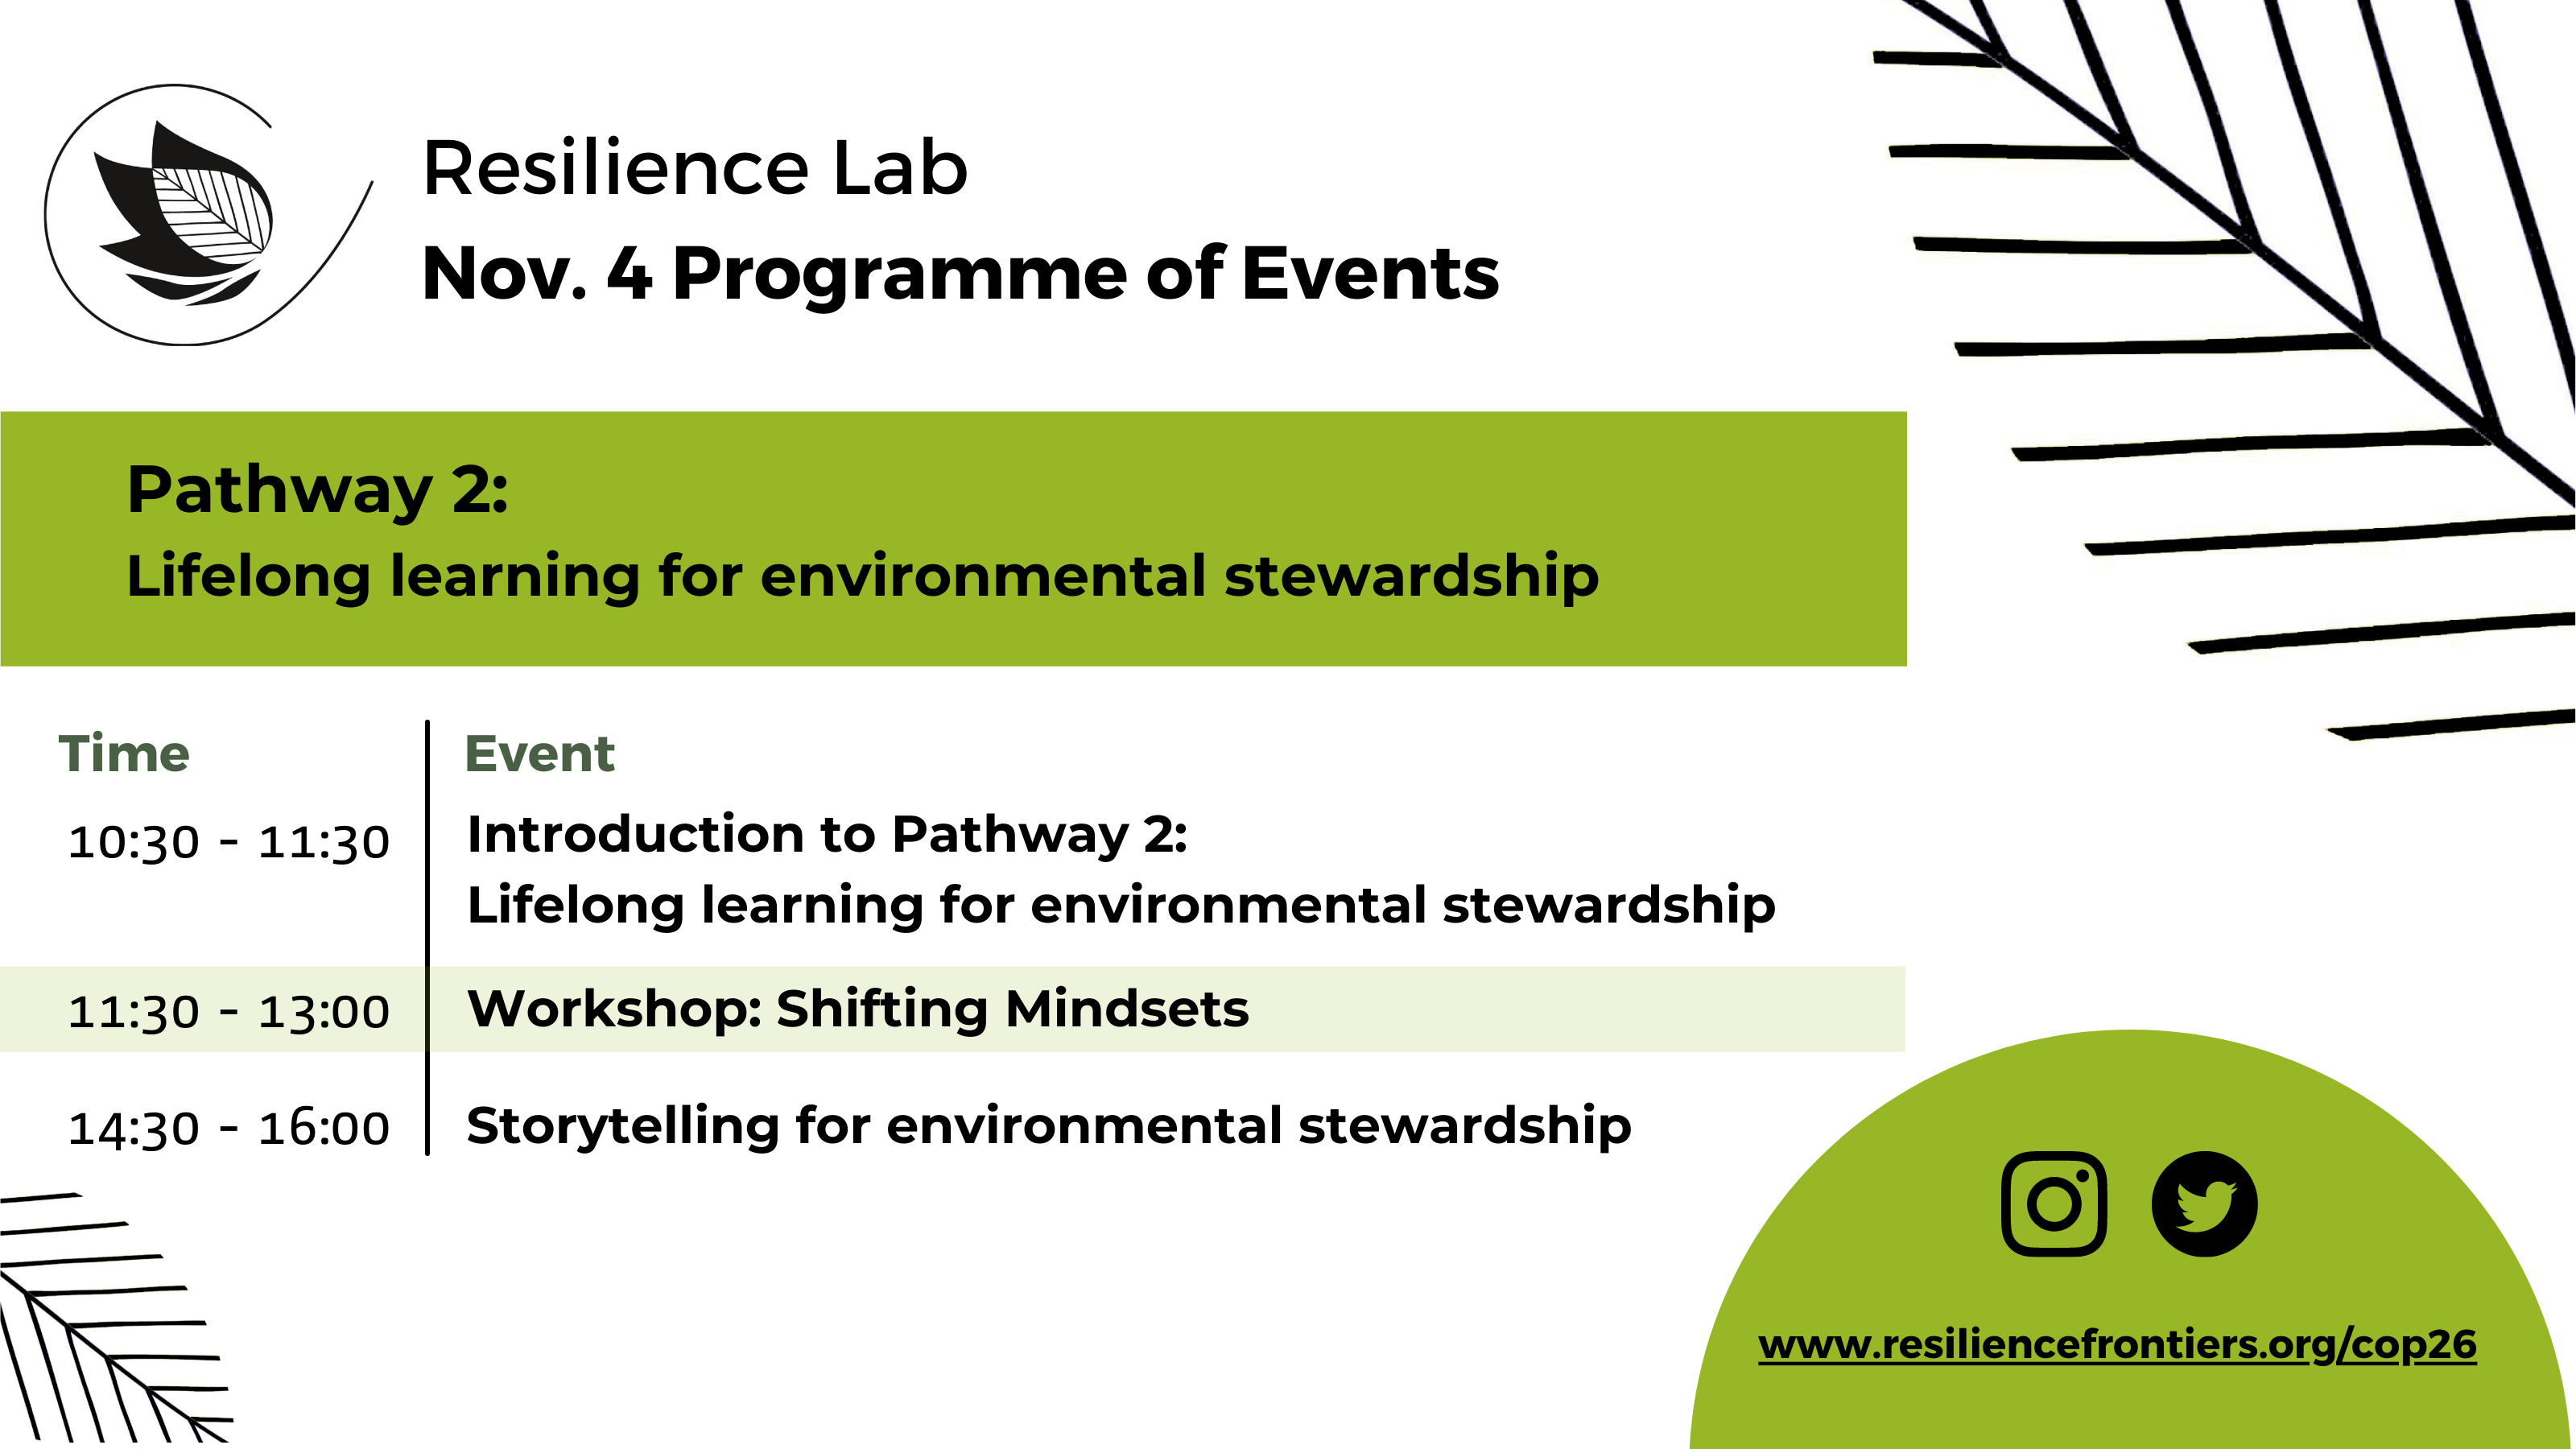   Resilience Lab Day 3 Programme of Events